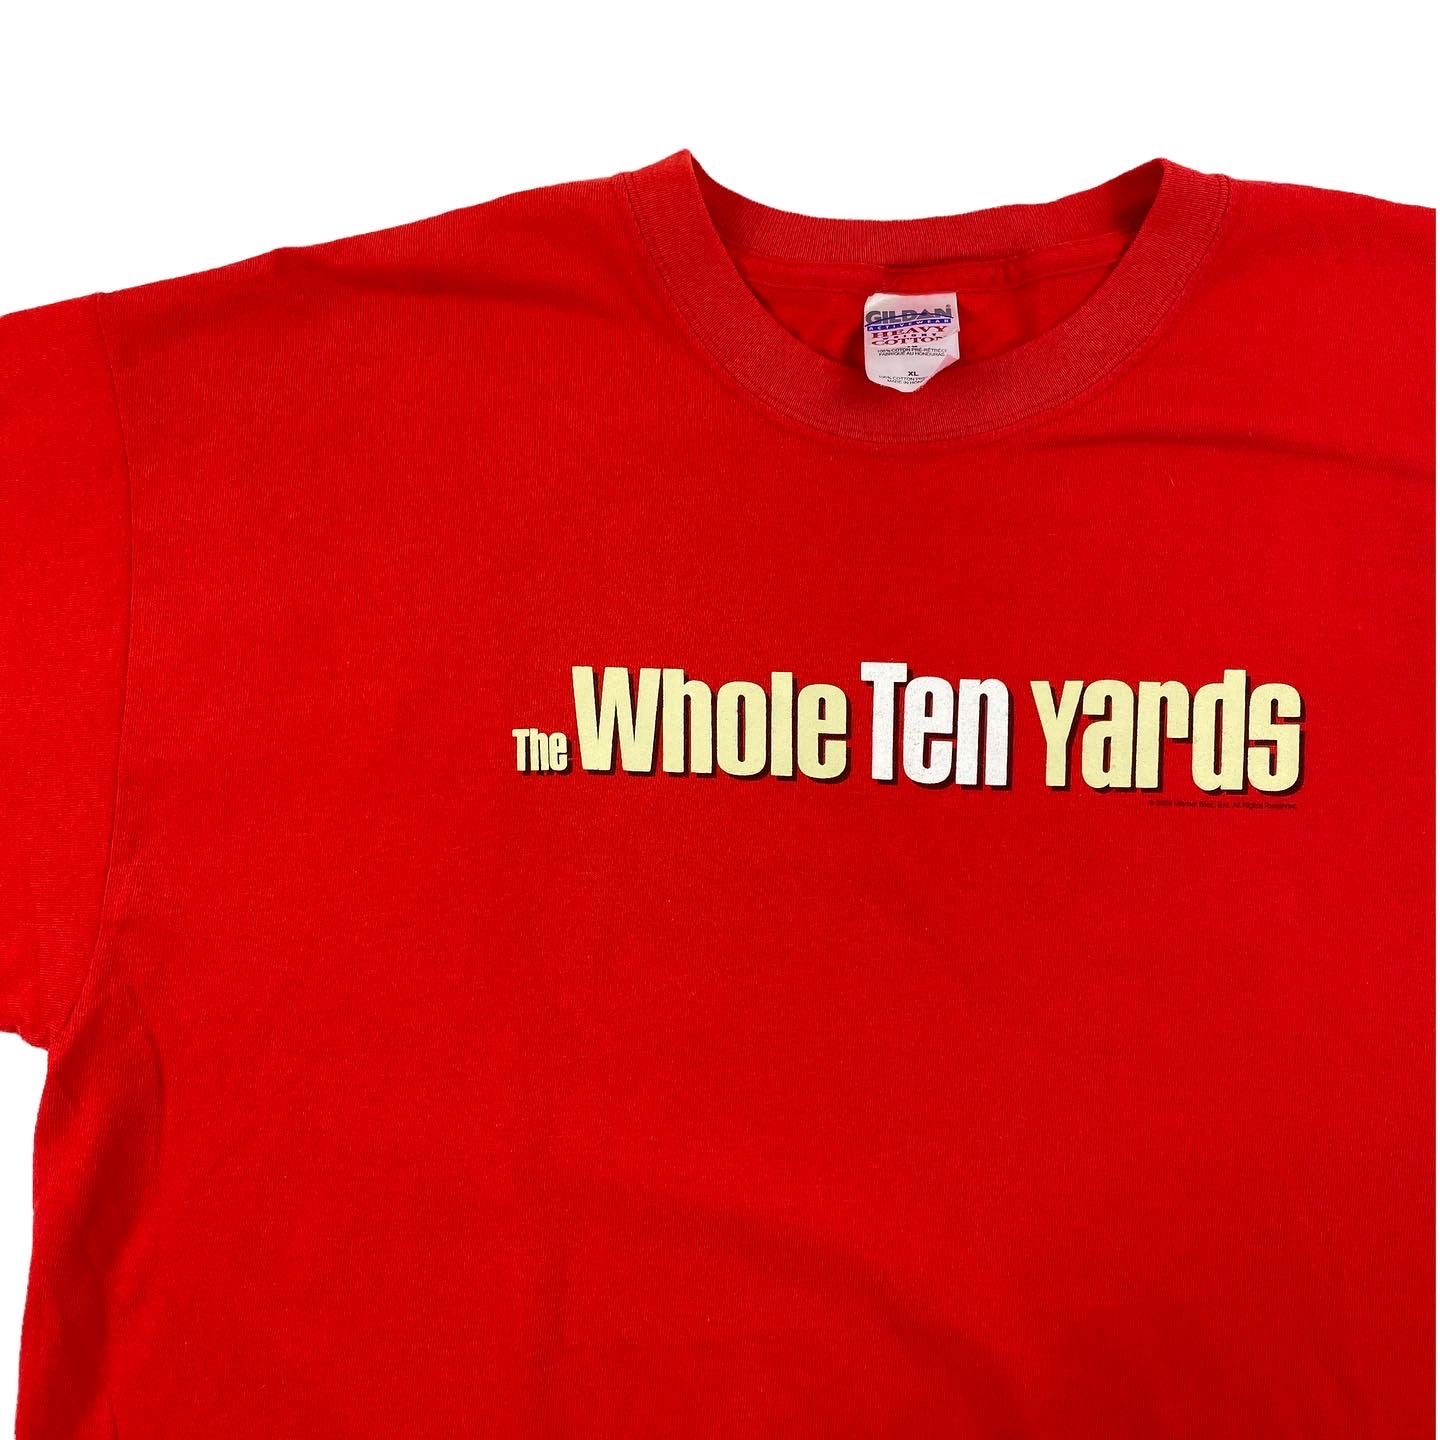 The whole ten yards movie tee XL